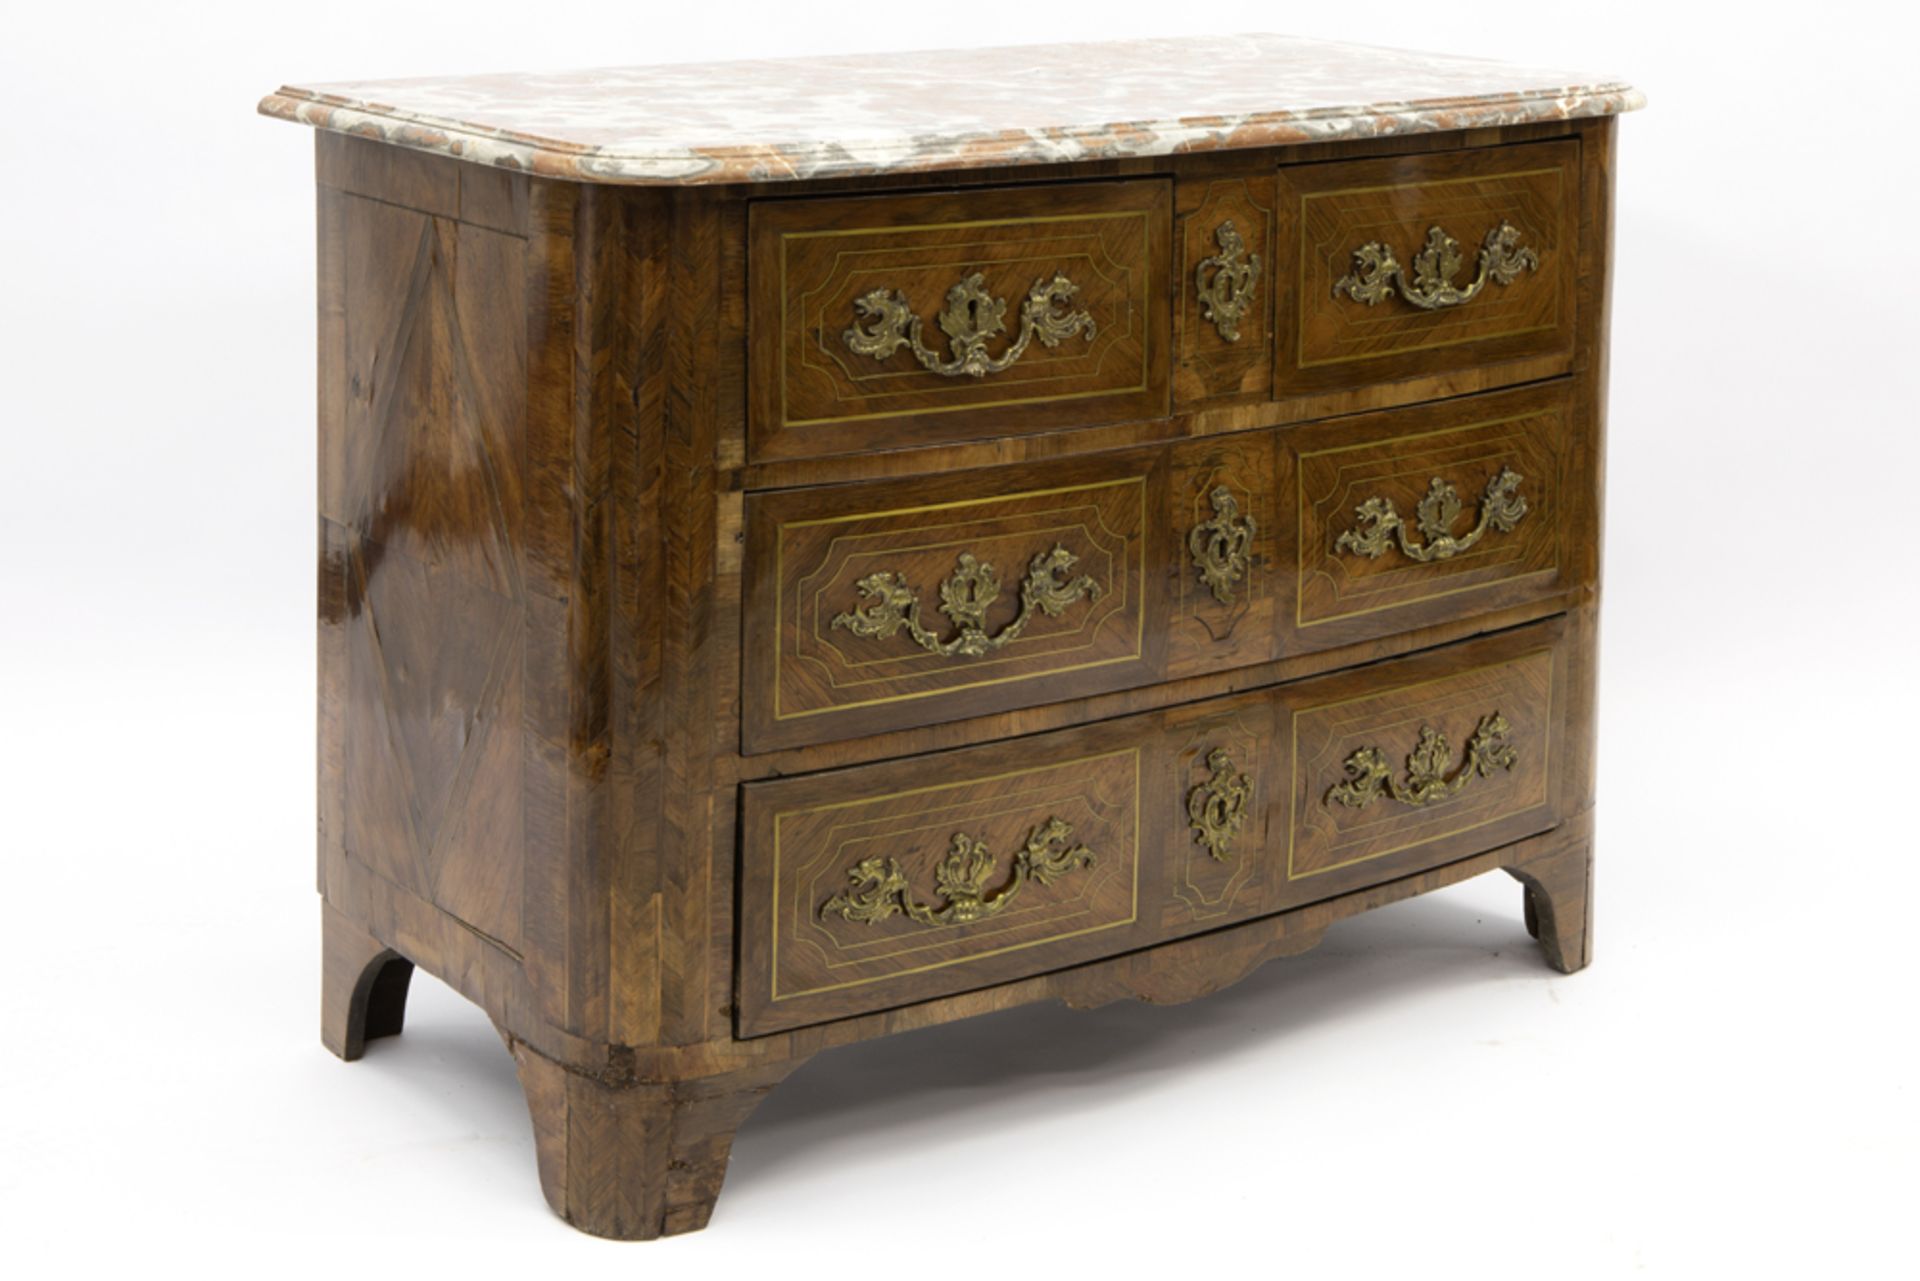 18th Cent. chest of drawers in parquetry with brass inlay, with four drawers with original mountings - Image 4 of 5